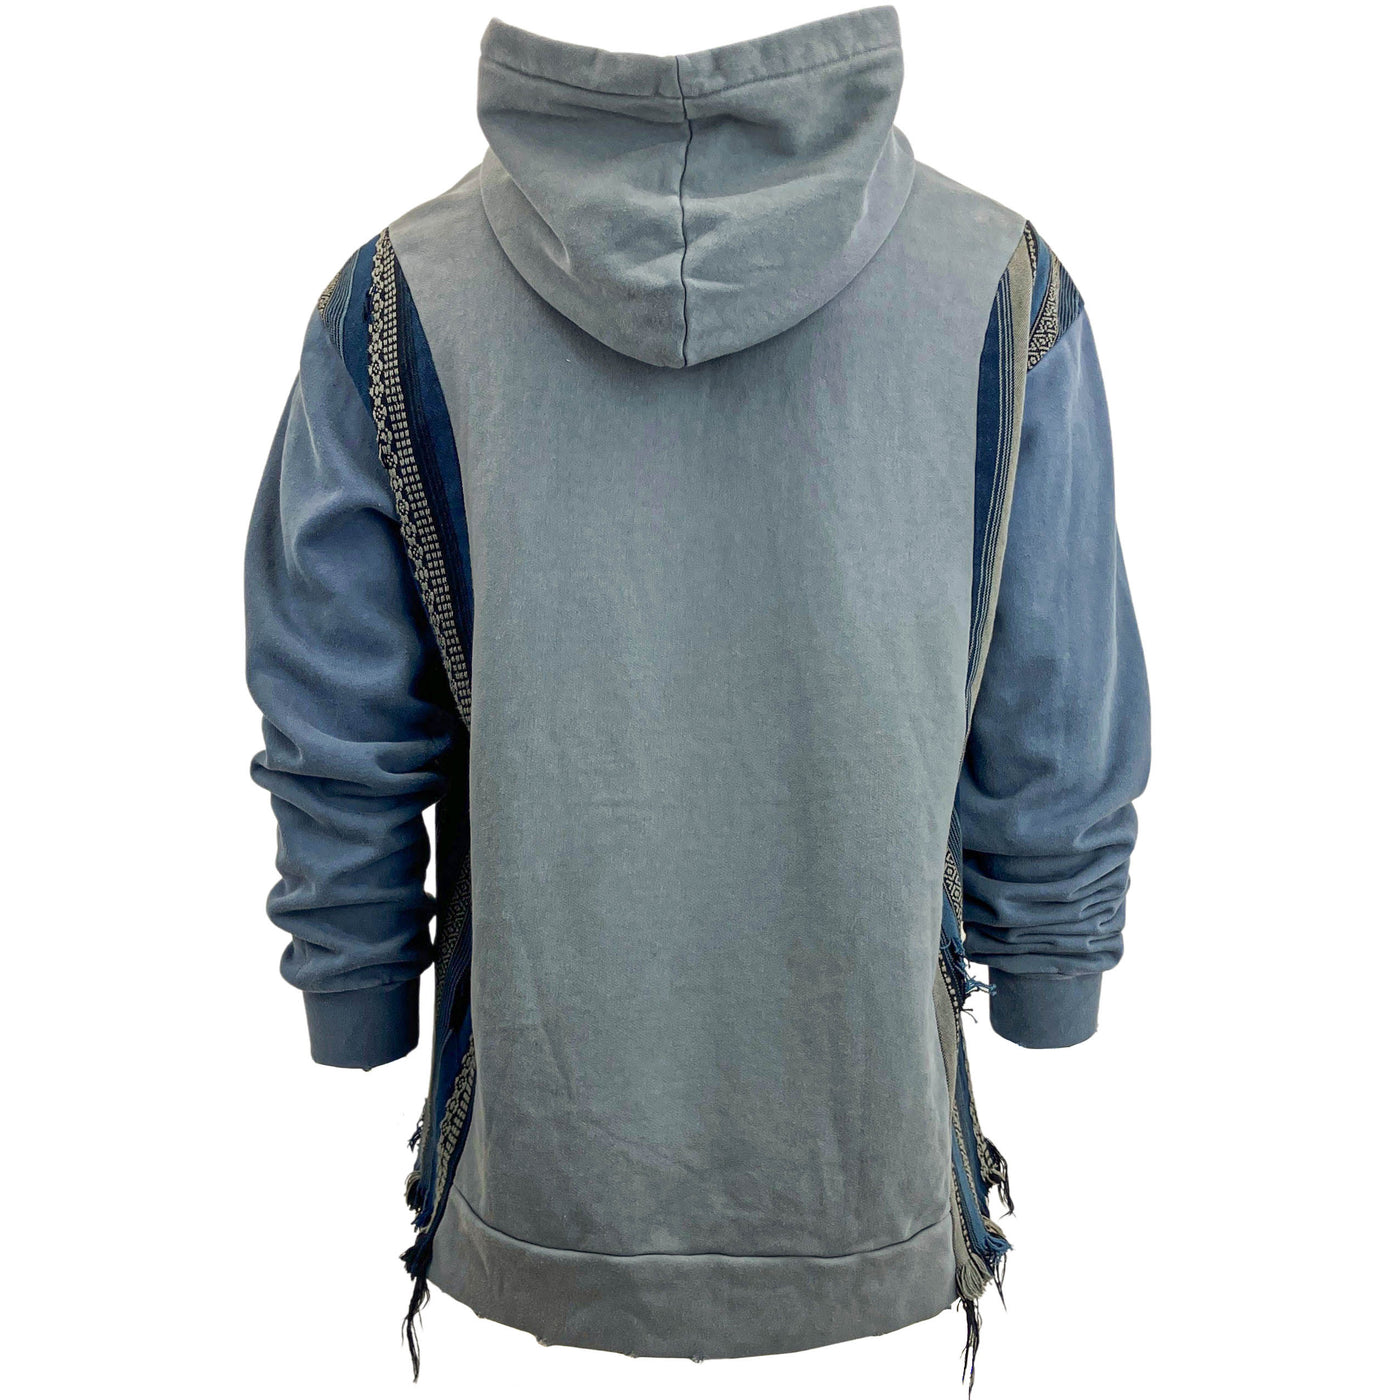 Alchemist Hunger Strike Hoodie in Grey and Blue - Discounts on Alchemist at UAL